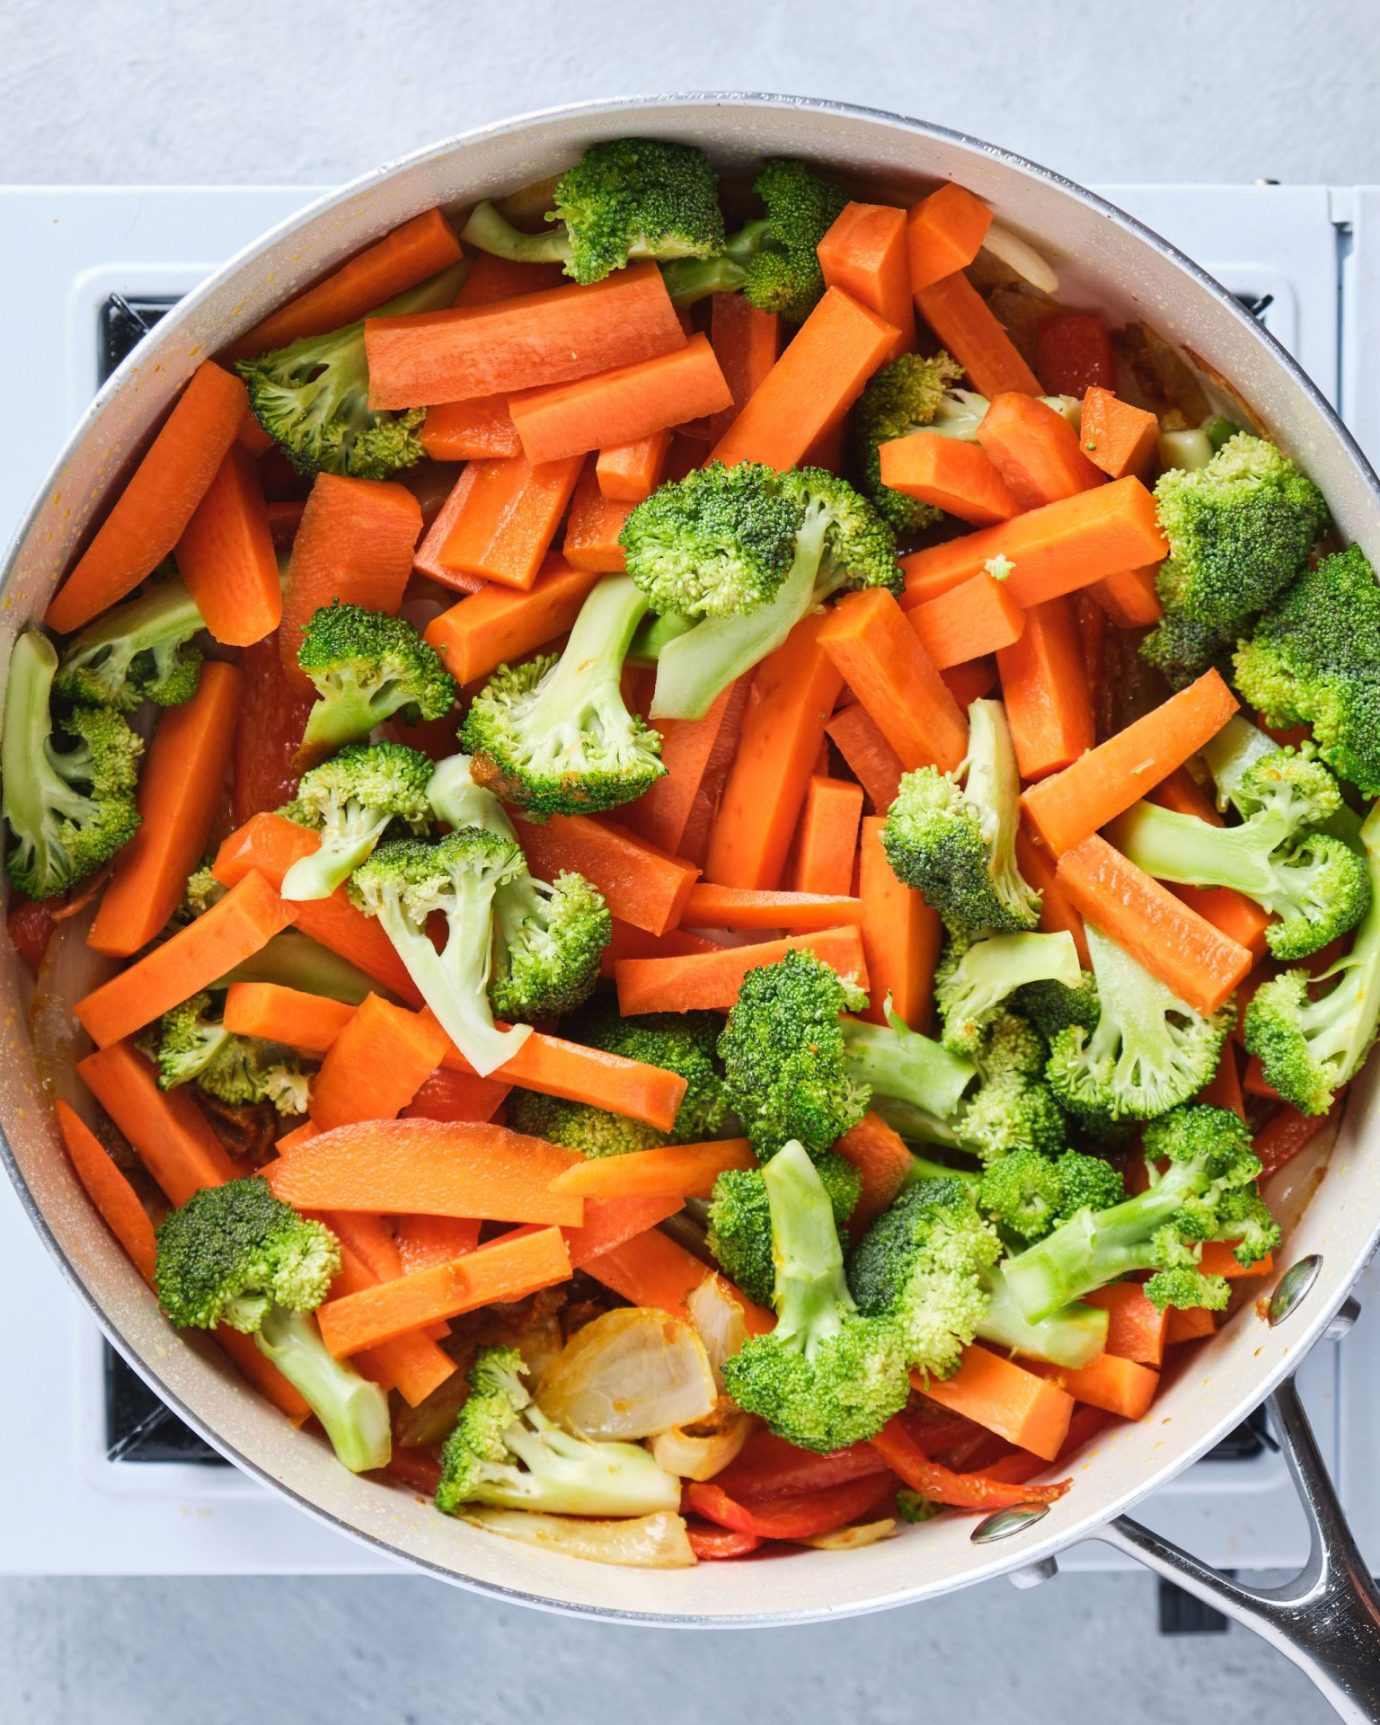 Chopped vegetables cooking in a frypan